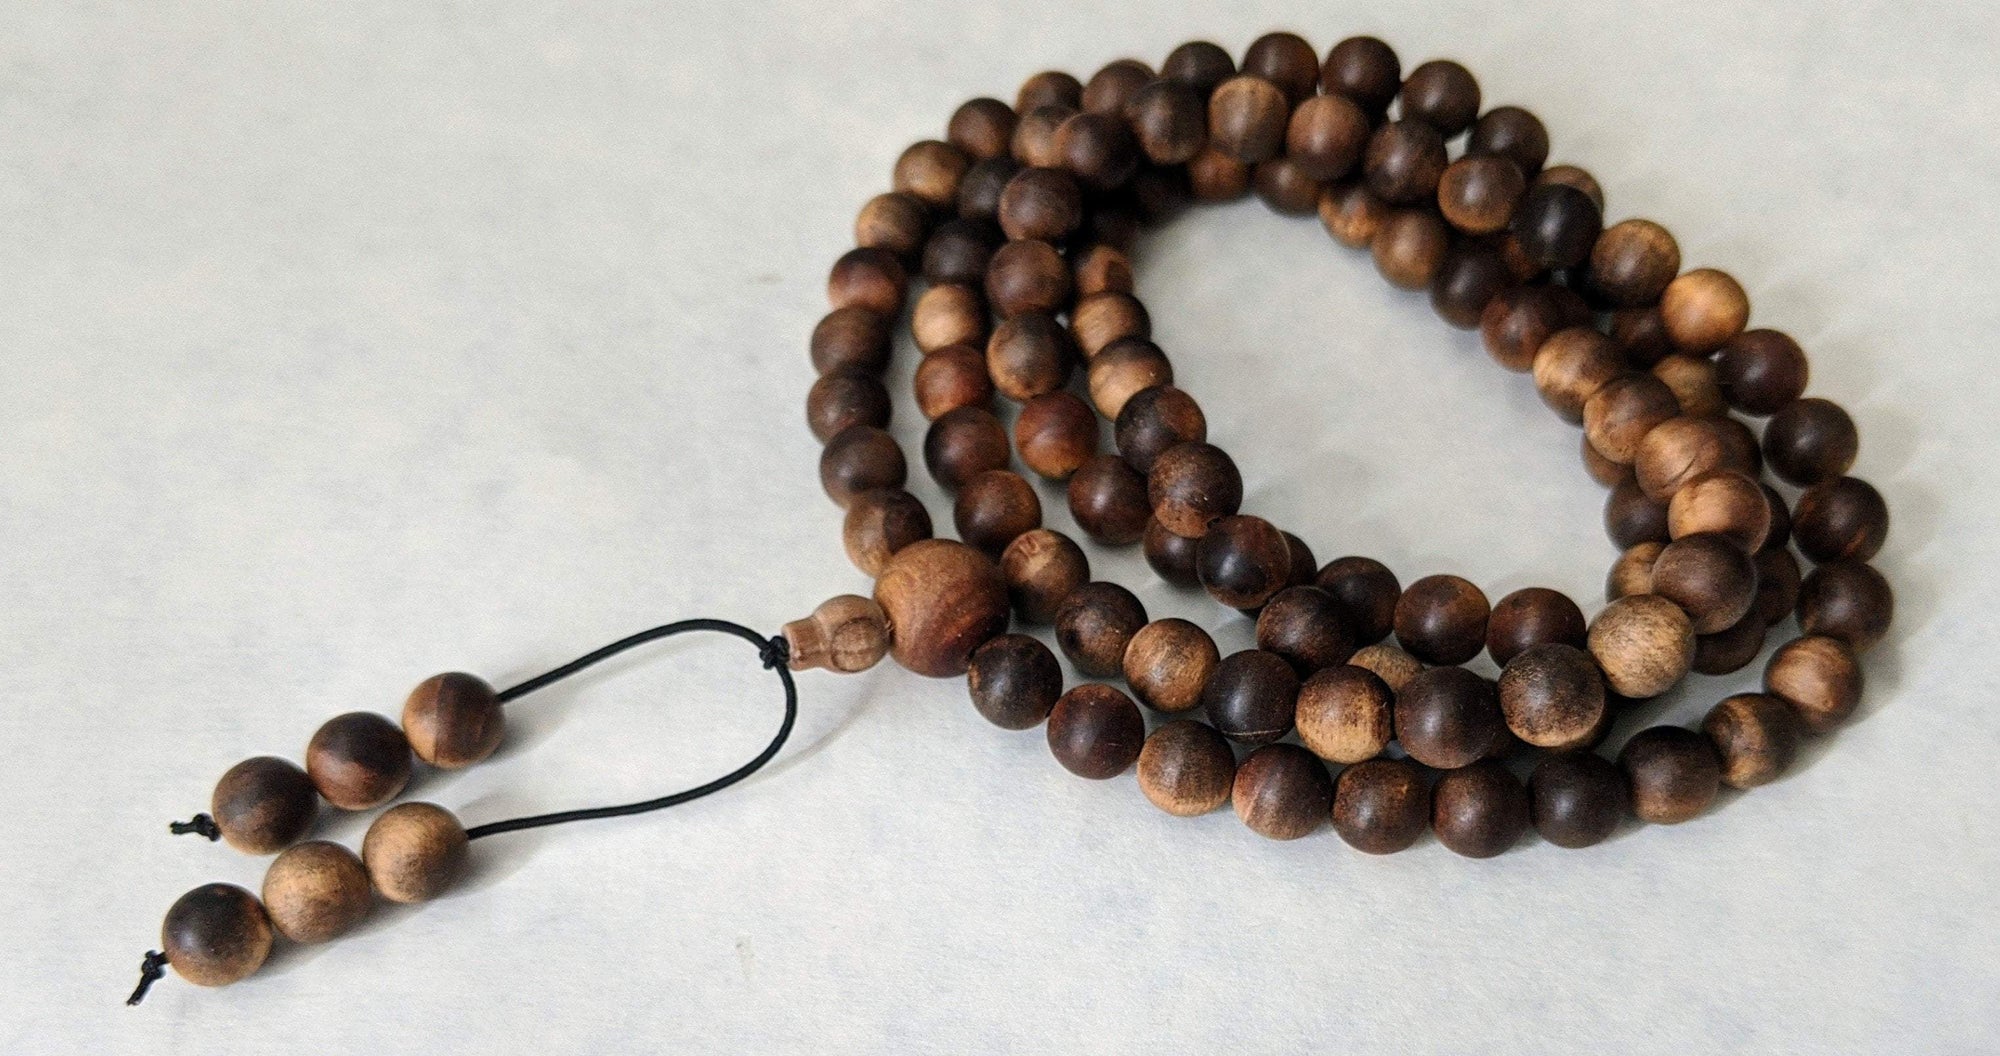 "The Beauty of the Death" Wild Aged Sandalwood beads - 1 x 108 mala 8mm - heavy sinking beads Dimension: 8mm Weight around 37g